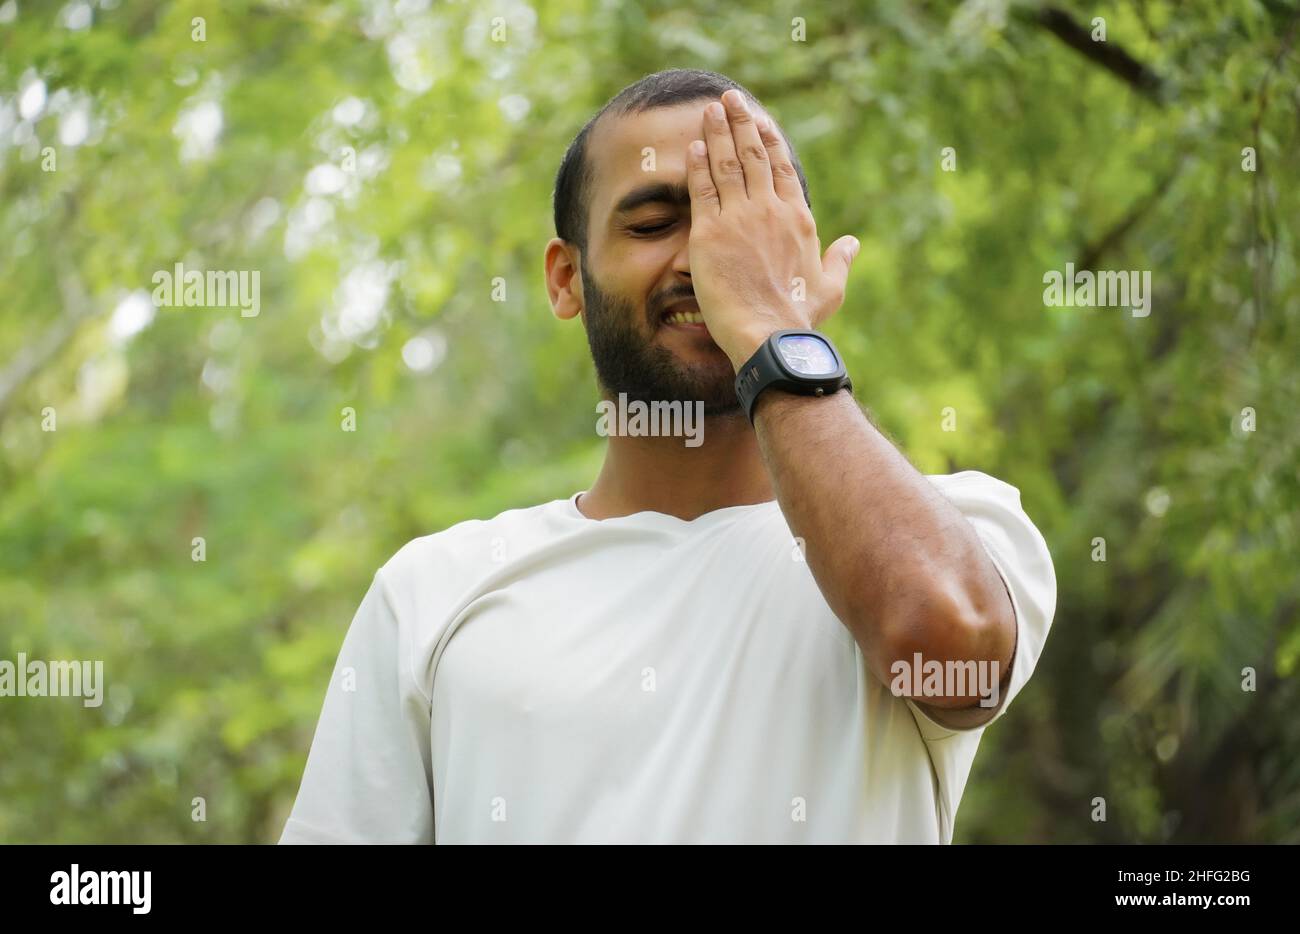 a man feels shy and happy covers his face Stock Photo